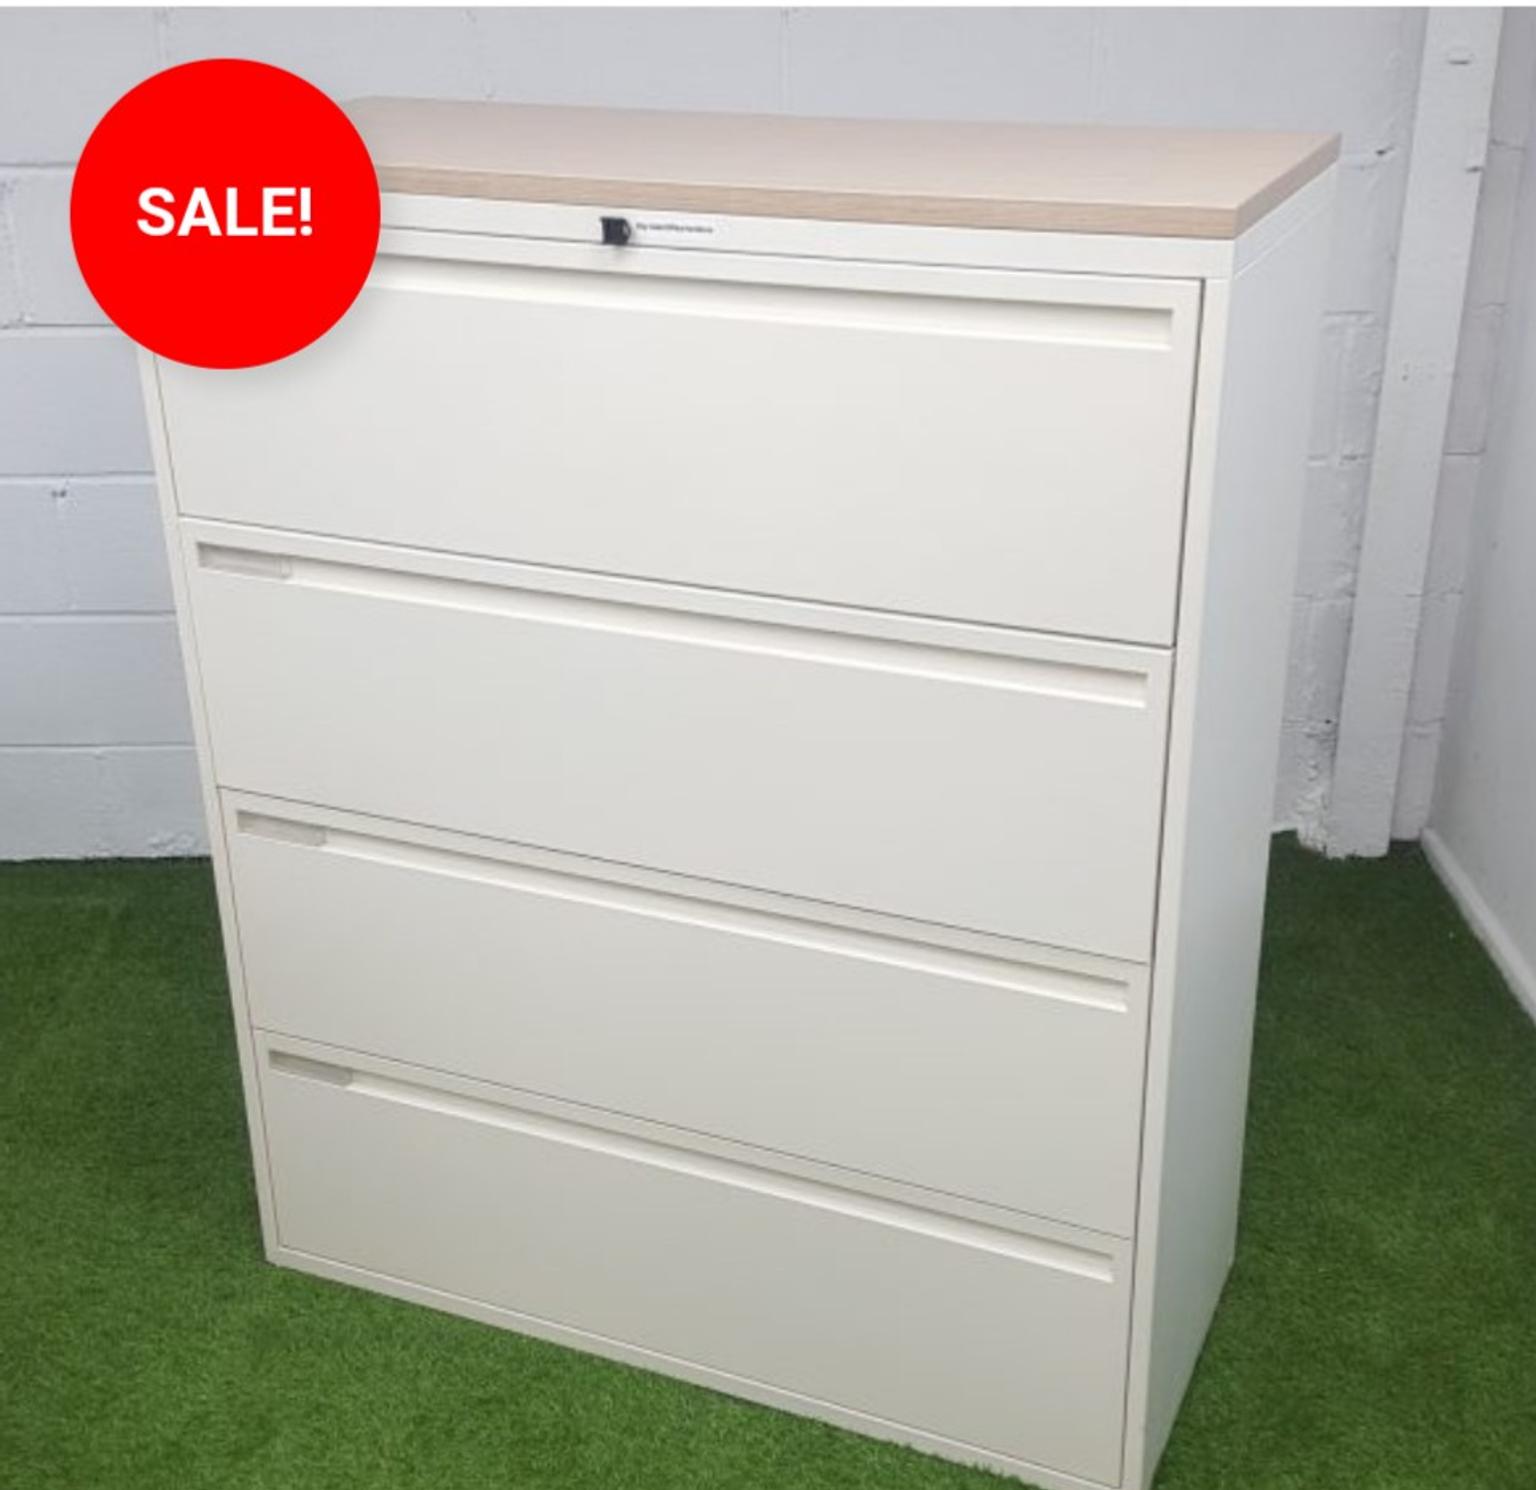 Office Furniture Unbeatable Prices From 10 In Cm20 Harlow For